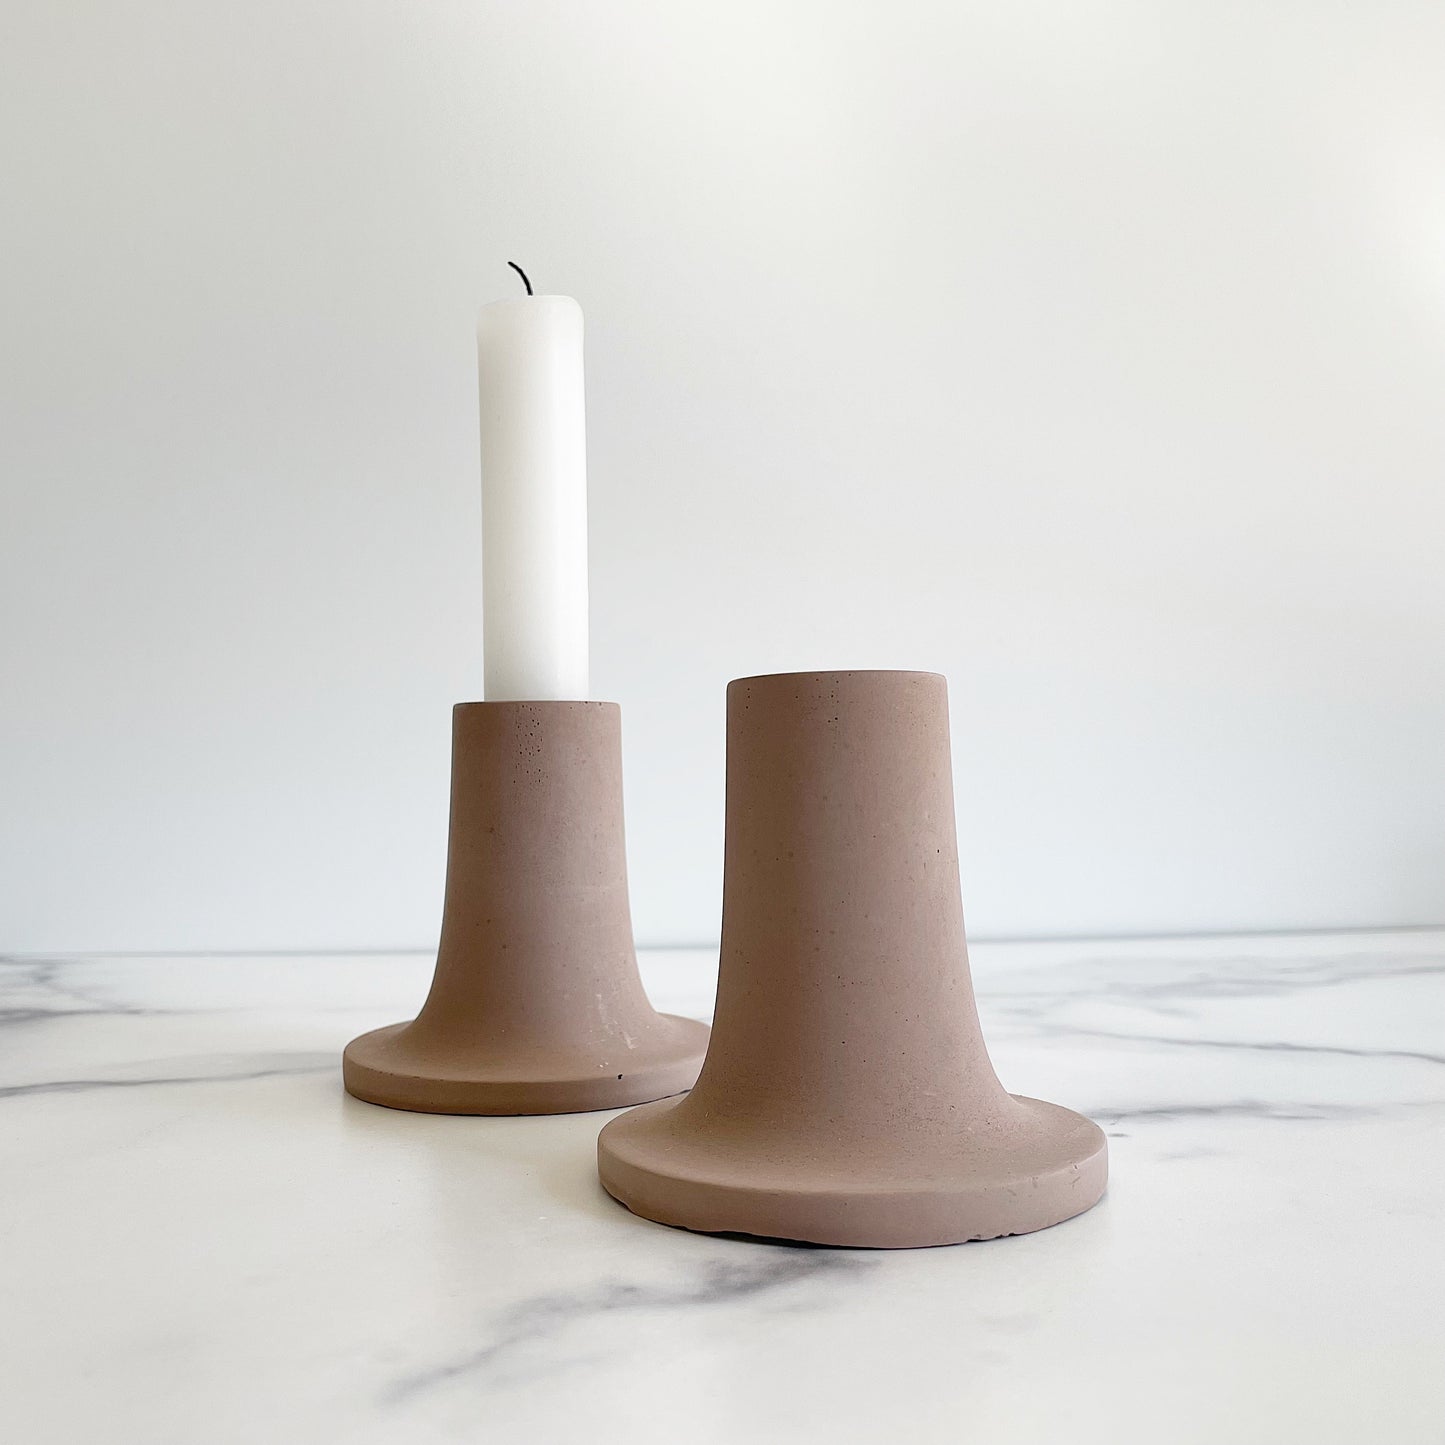 Concrete Candle Holder 4